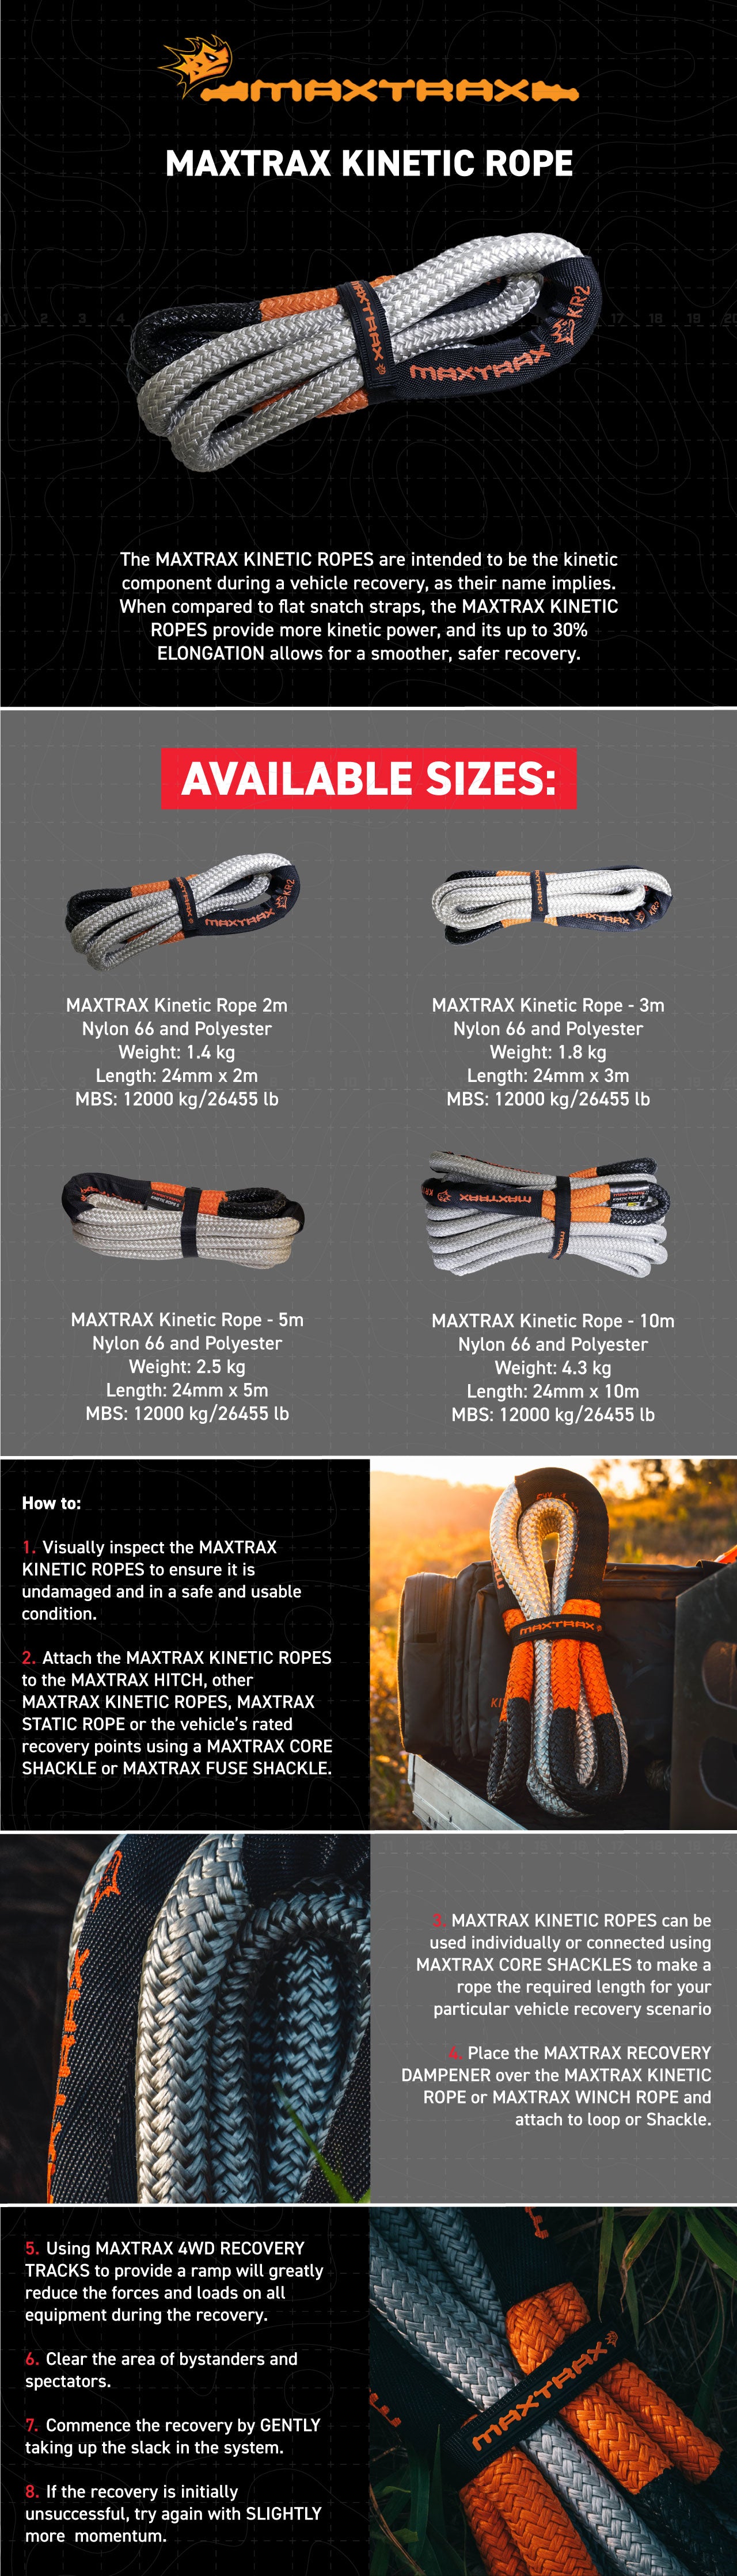 The MAXTRAX KINETIC ROPES are intended to be the kinetic component during a vehicle recovery, as their name implies. When compared to flat snatch straps, the MAXTRAX KINETIC ROPES provide more kinetic power, and its up to 30% ELONGATION allows for a smoother, safer recovery.